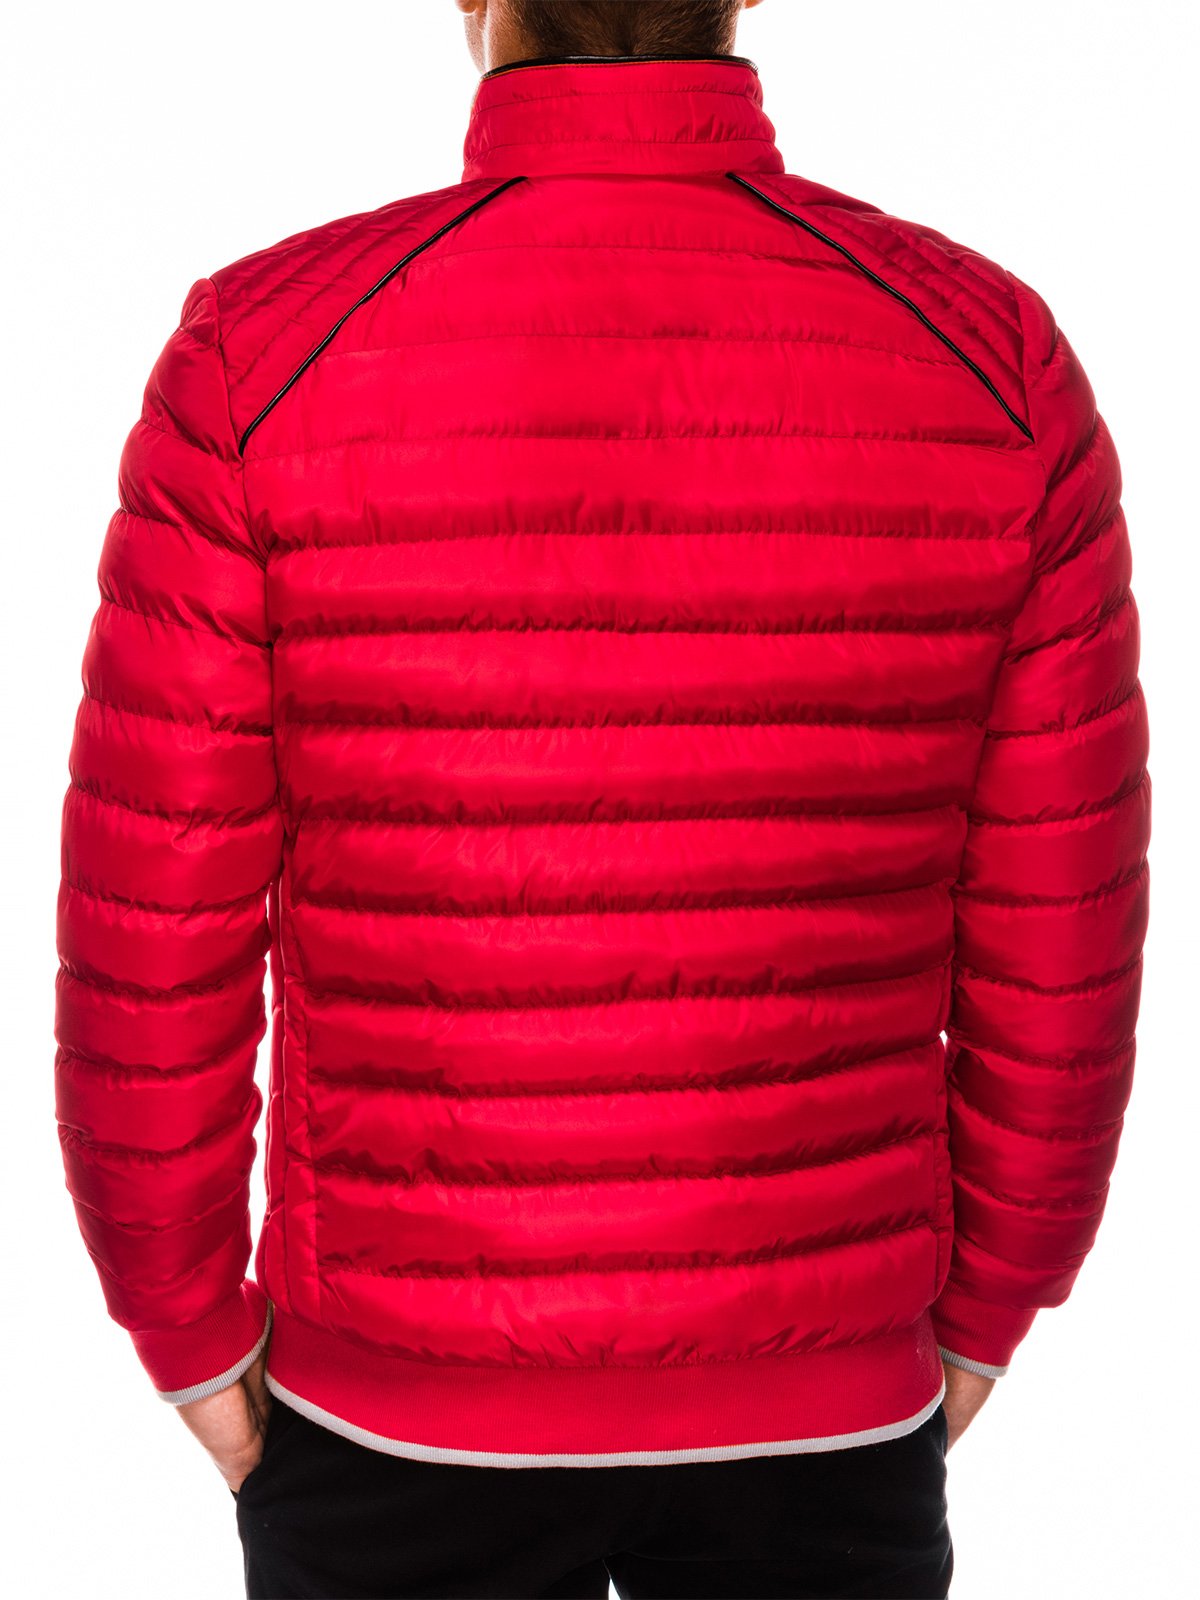 Men's winter quilted jacket C422 - red | MODONE wholesale - Clothing ...